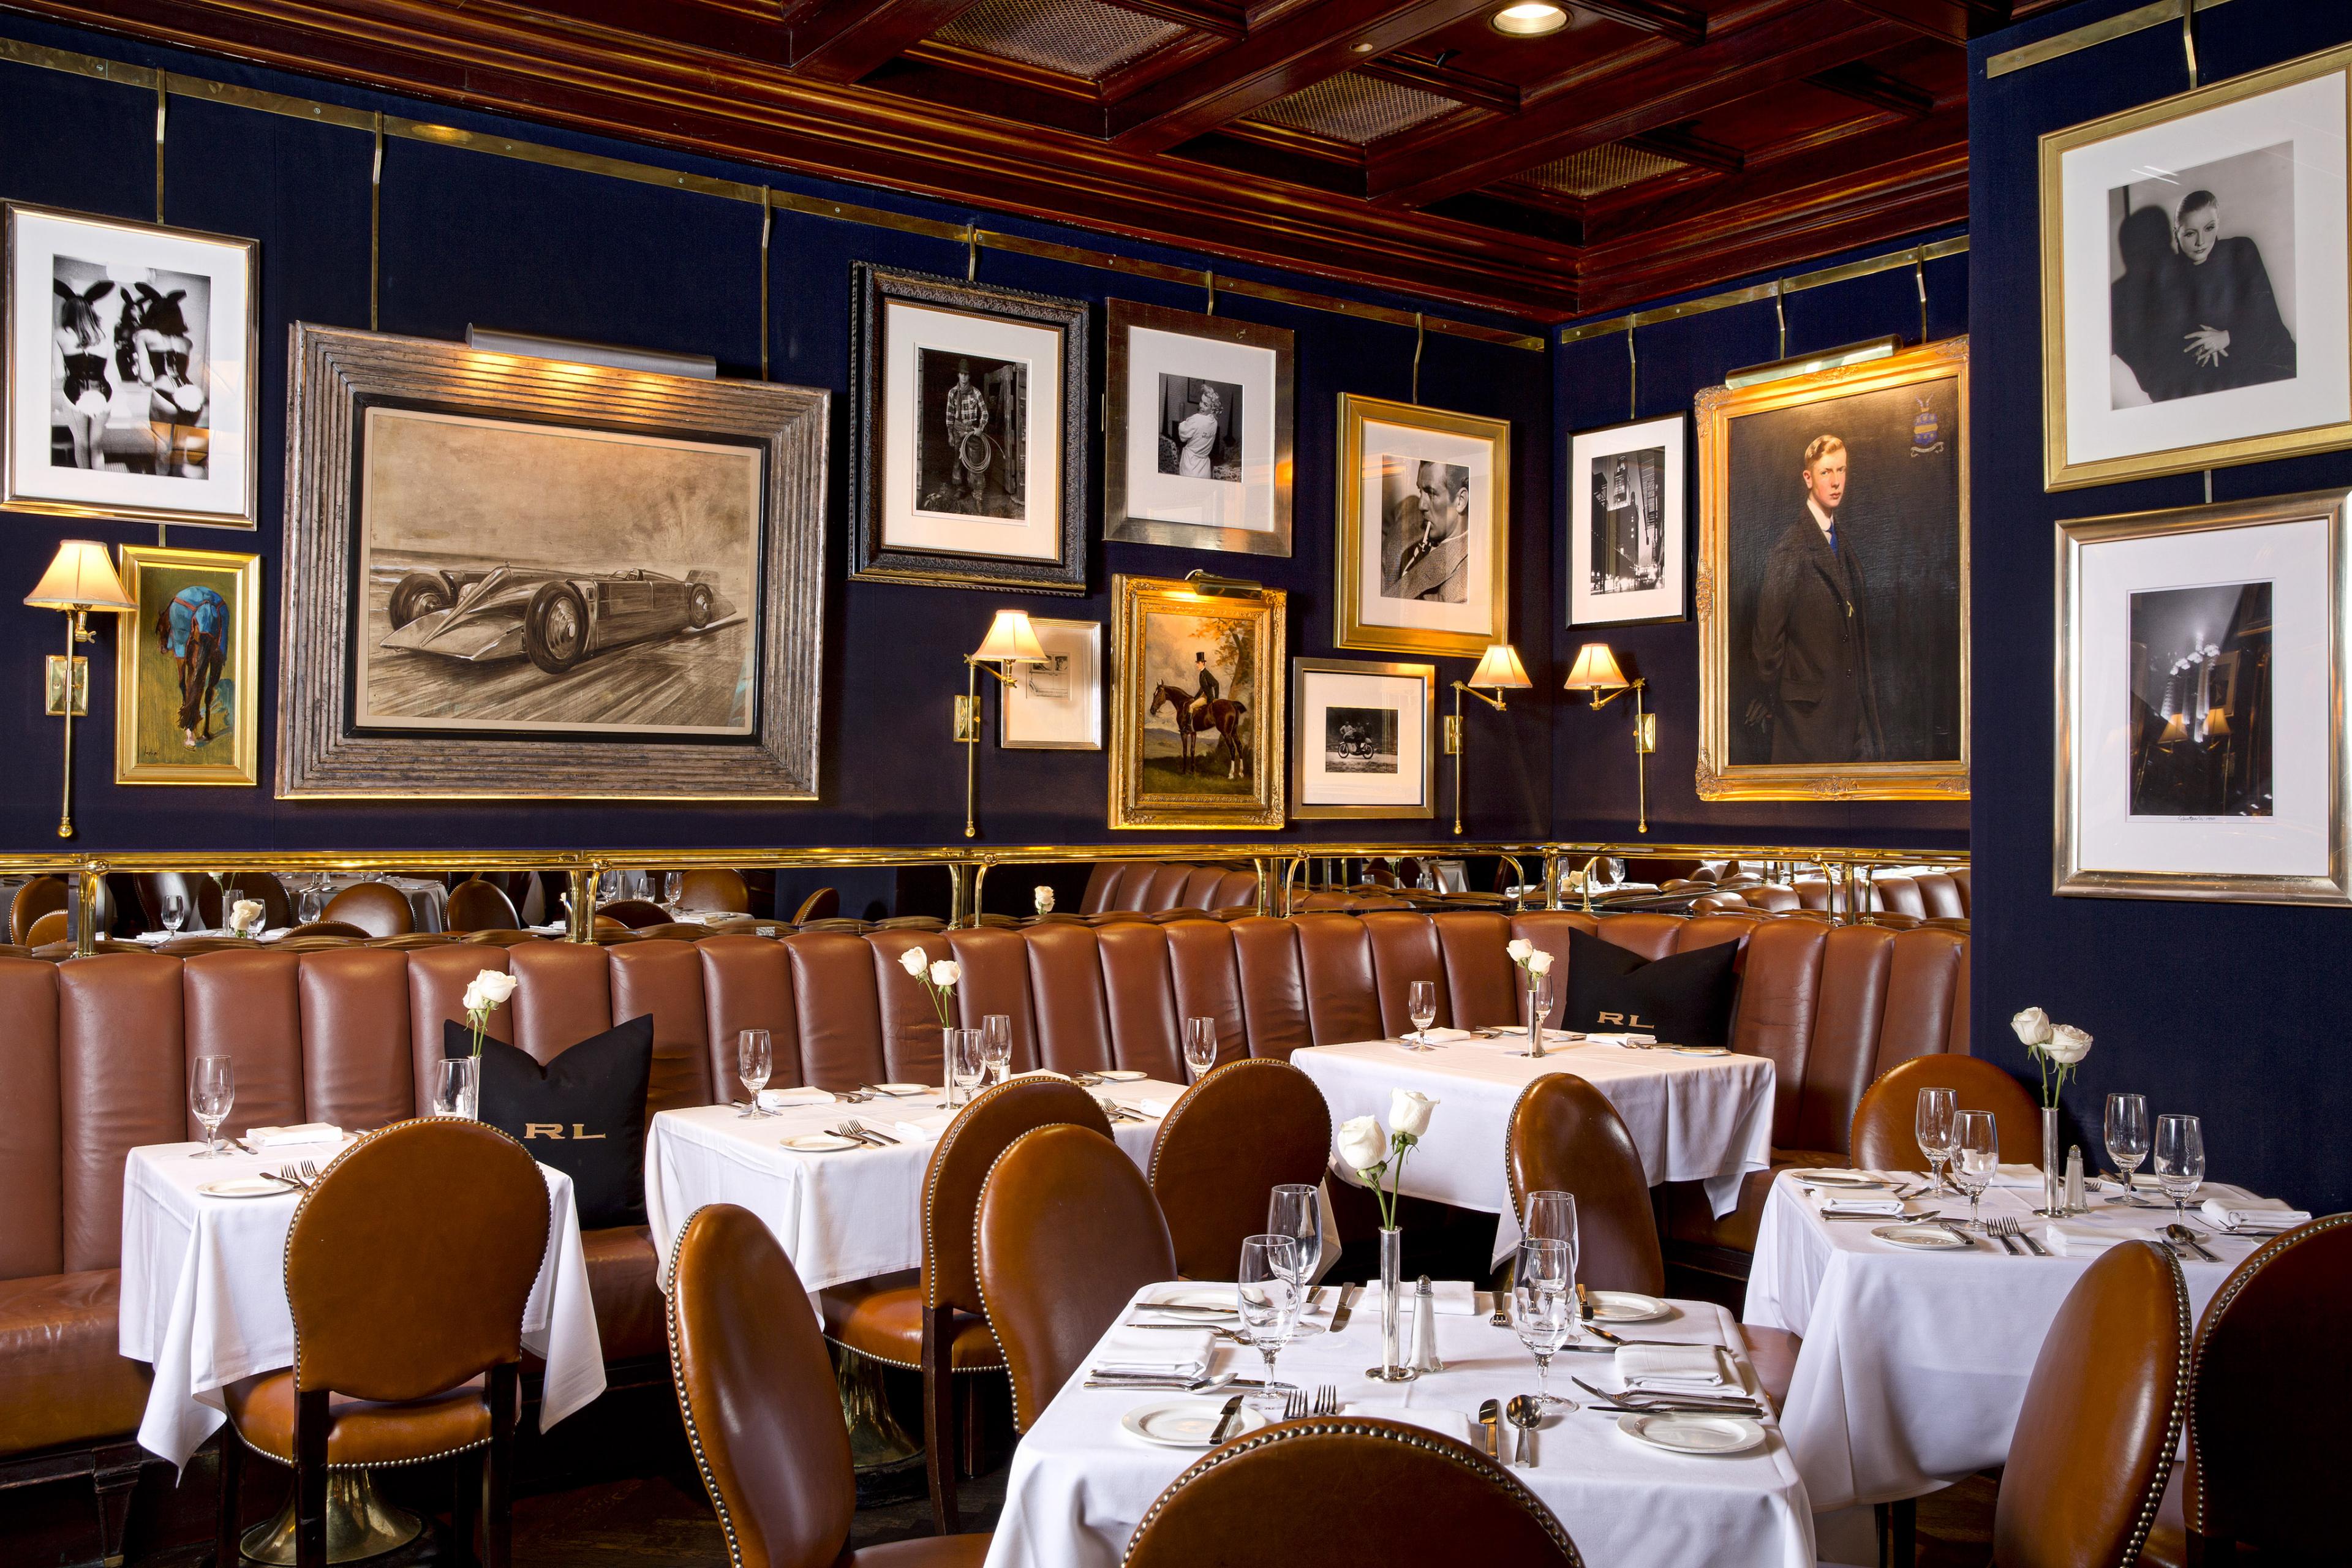 interior of restaurant with portraits on the wall